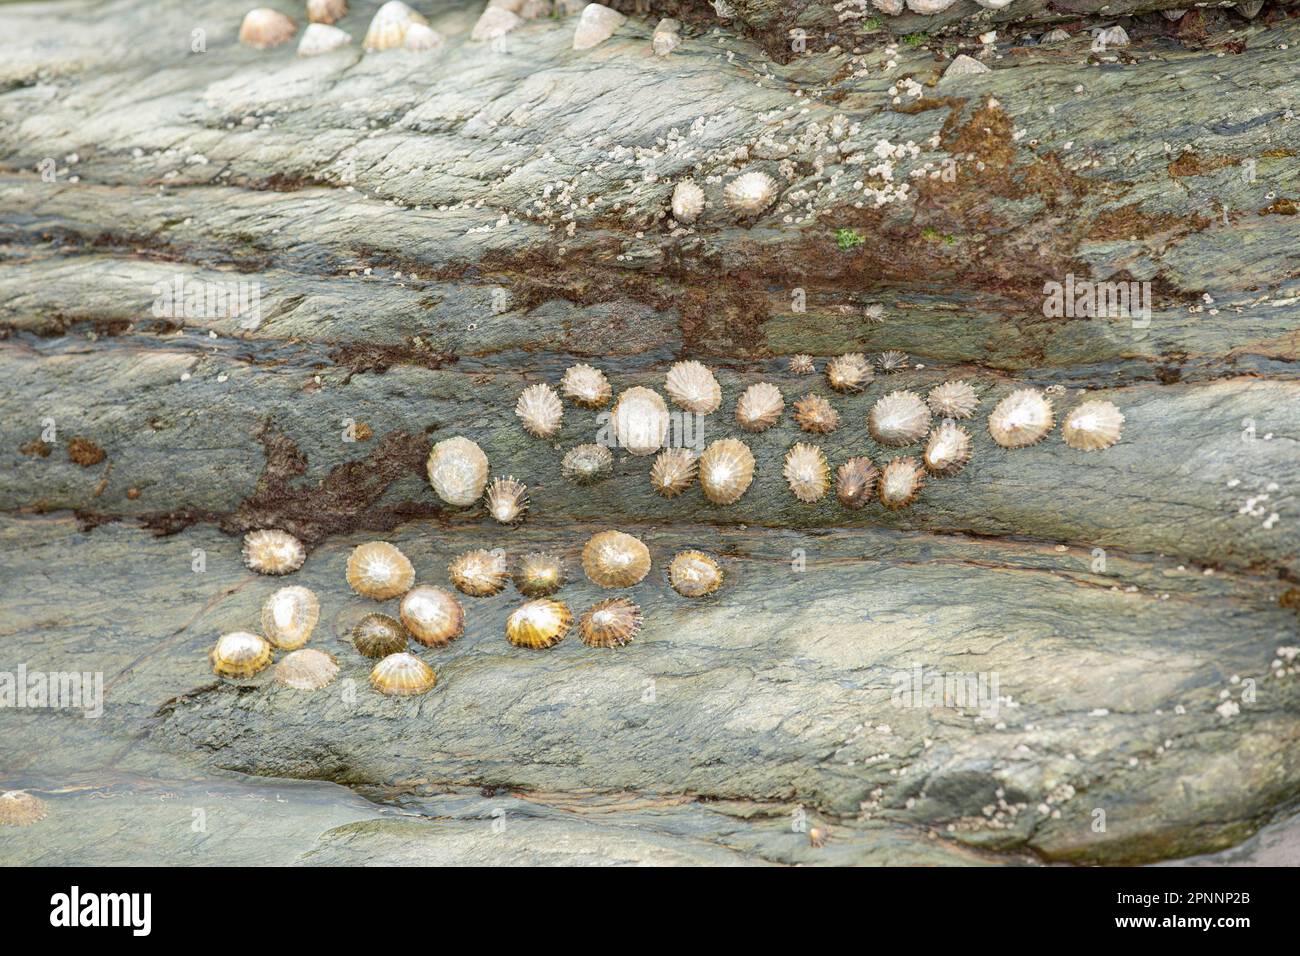 Limpets on rock in rocky shore tide pool or rock pool, Scutellastra granularis, Granular limpet Stock Photo